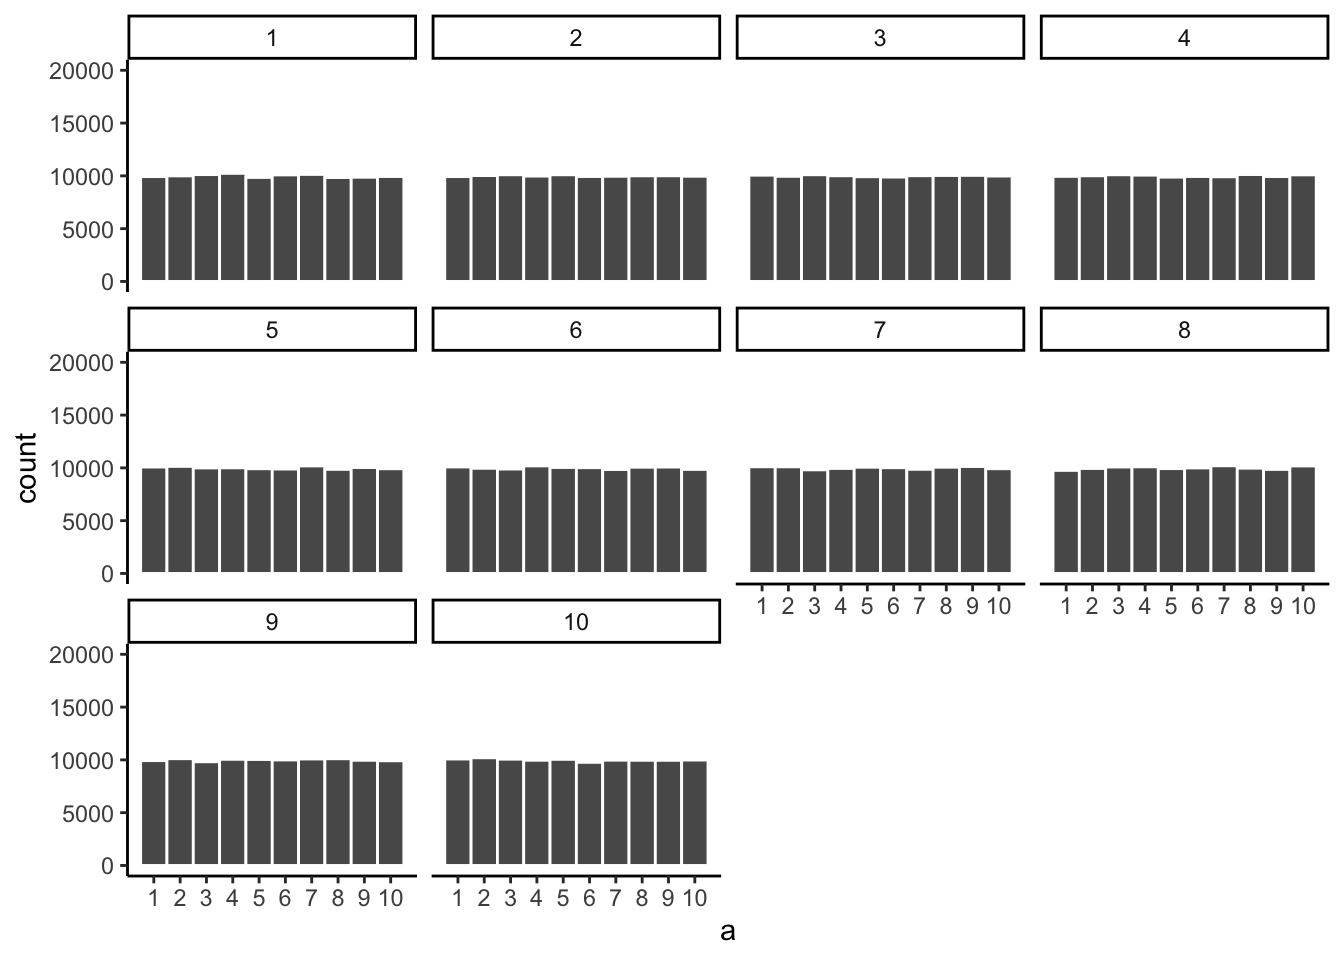 Histograms for different samples from a uniform distribution. Sample-size = 100,000 for each sample.